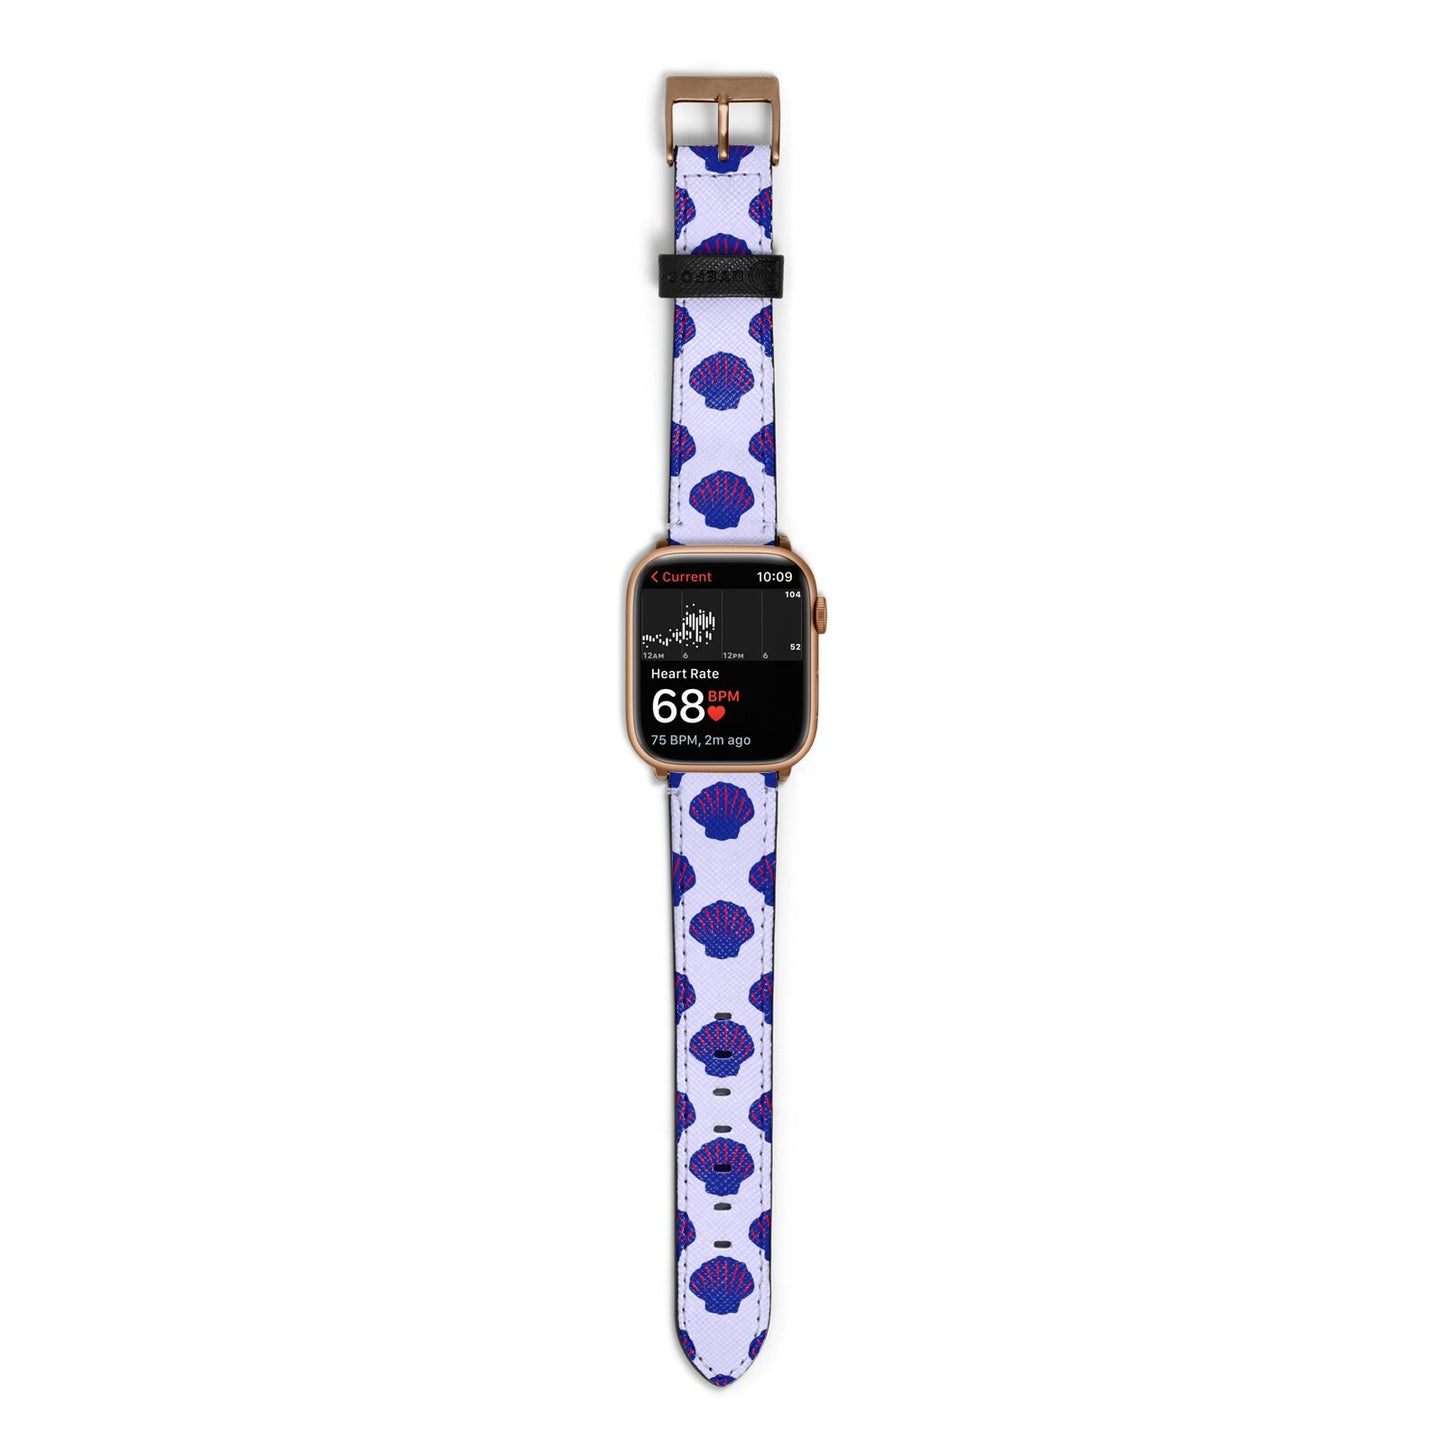 Shell Pattern Apple Watch Strap Size 38mm with Gold Hardware